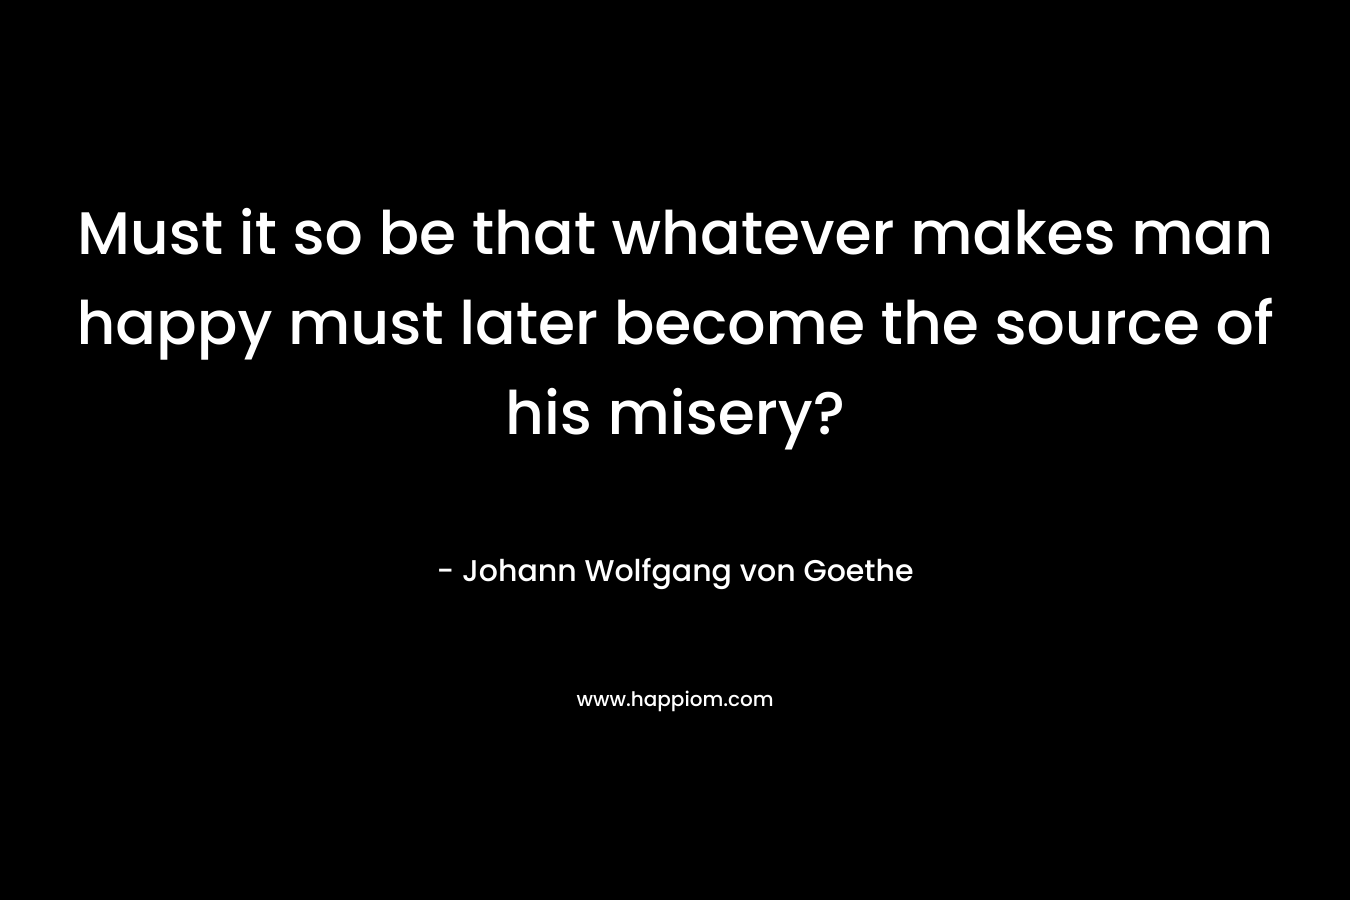 Must it so be that whatever makes man happy must later become the source of his misery?